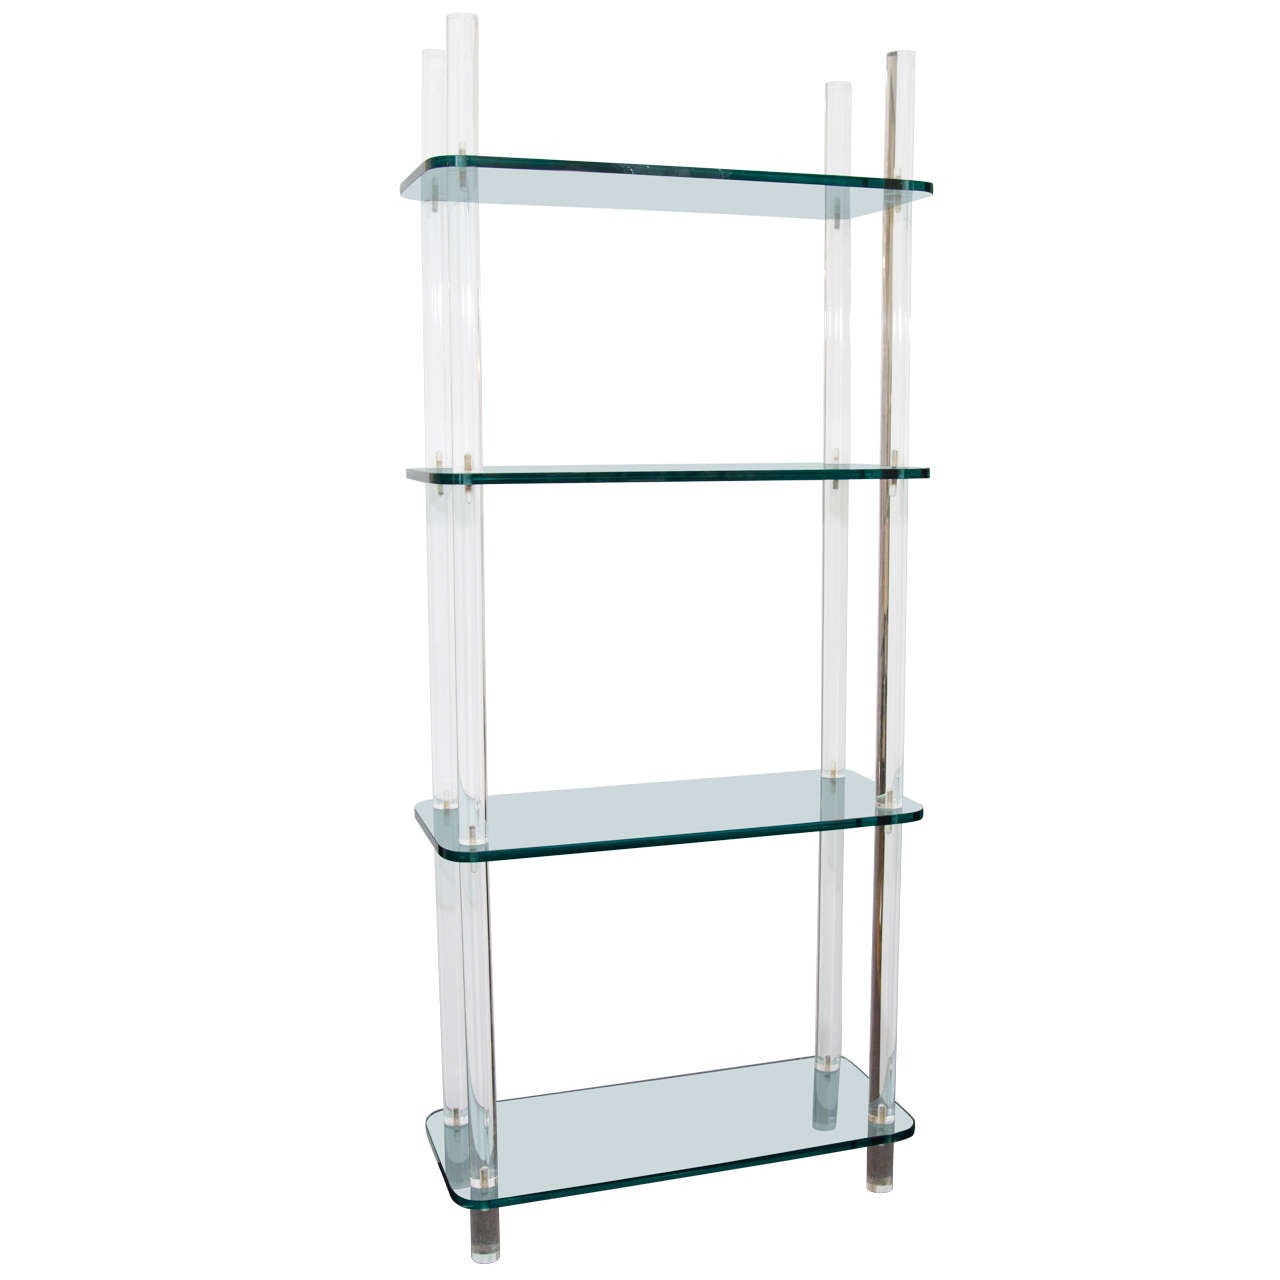 Midcentury Solid Lucite and Glass Bookshelf or Bookcase.